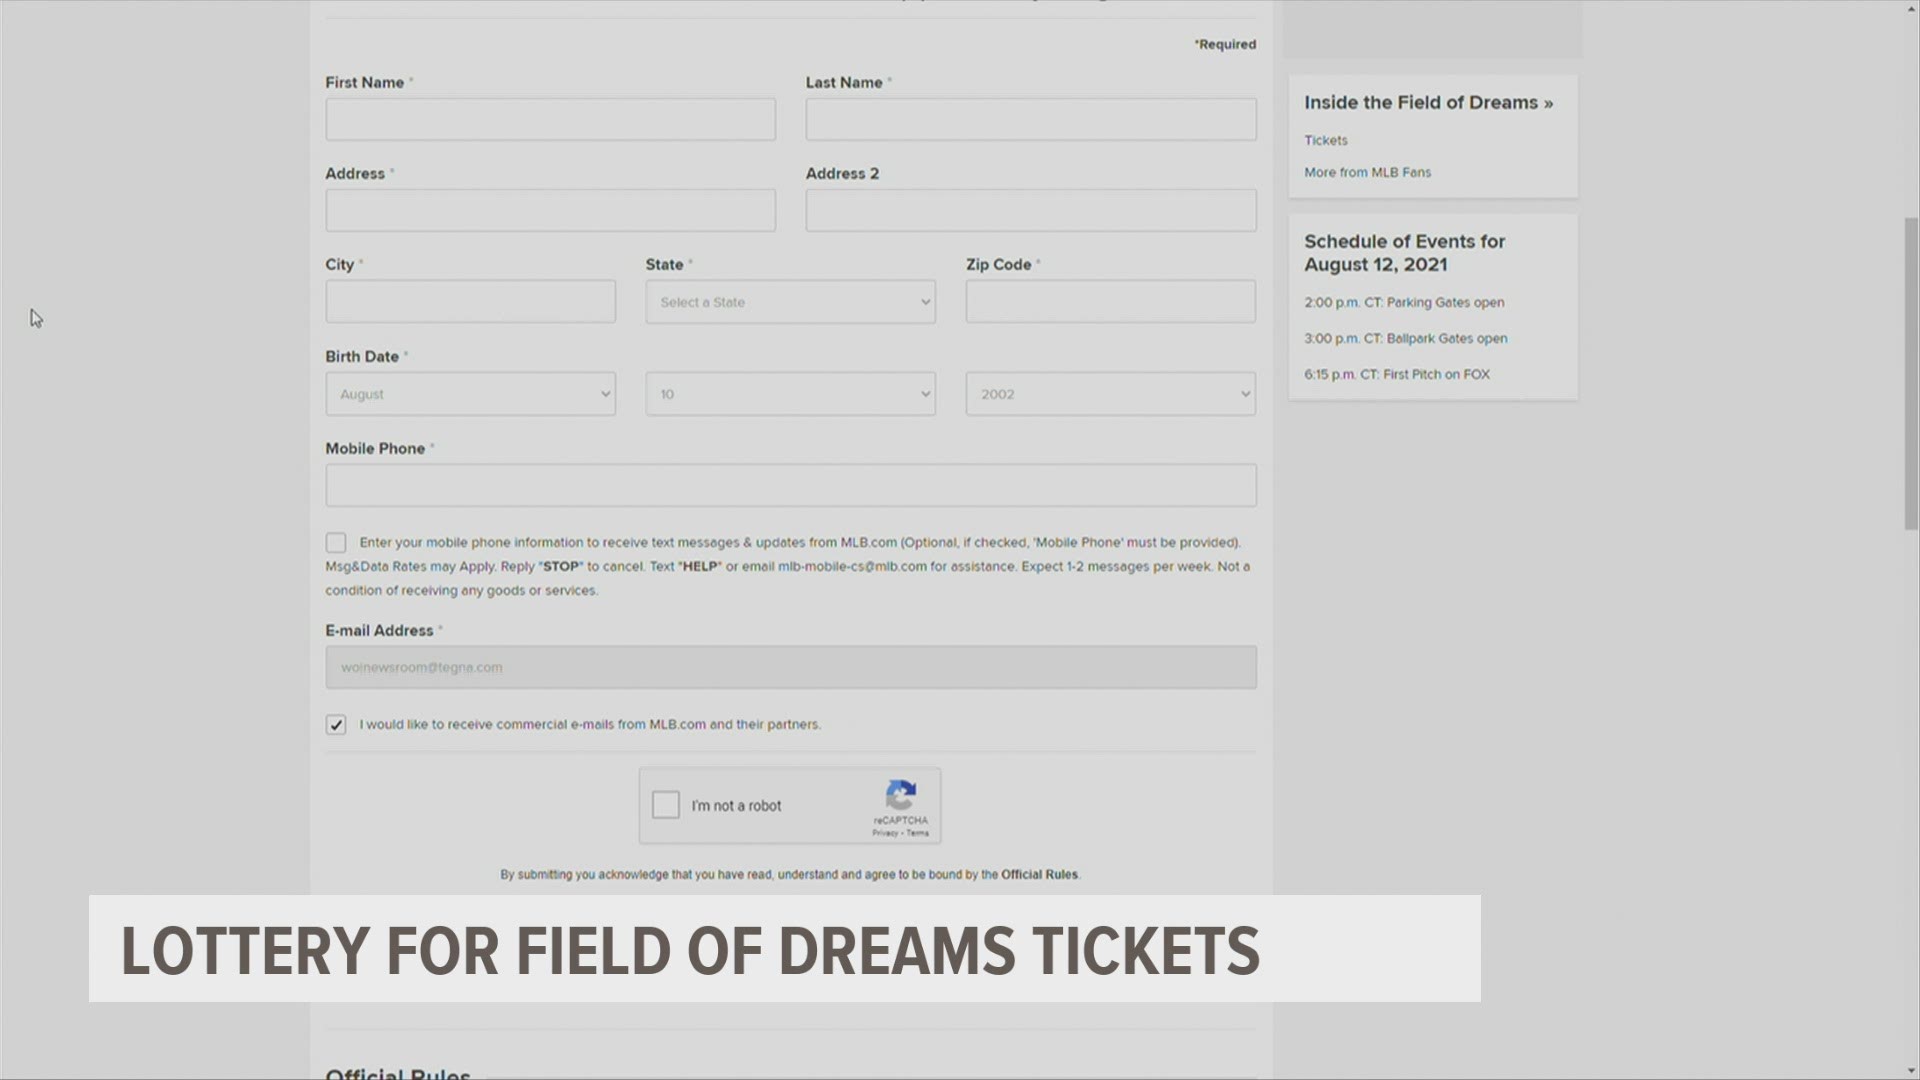 Registration is now open for the opportunity for Iowans to register to buy tickets to the Aug. 12 matchup between the Chicago White Sox and New York Yankees.